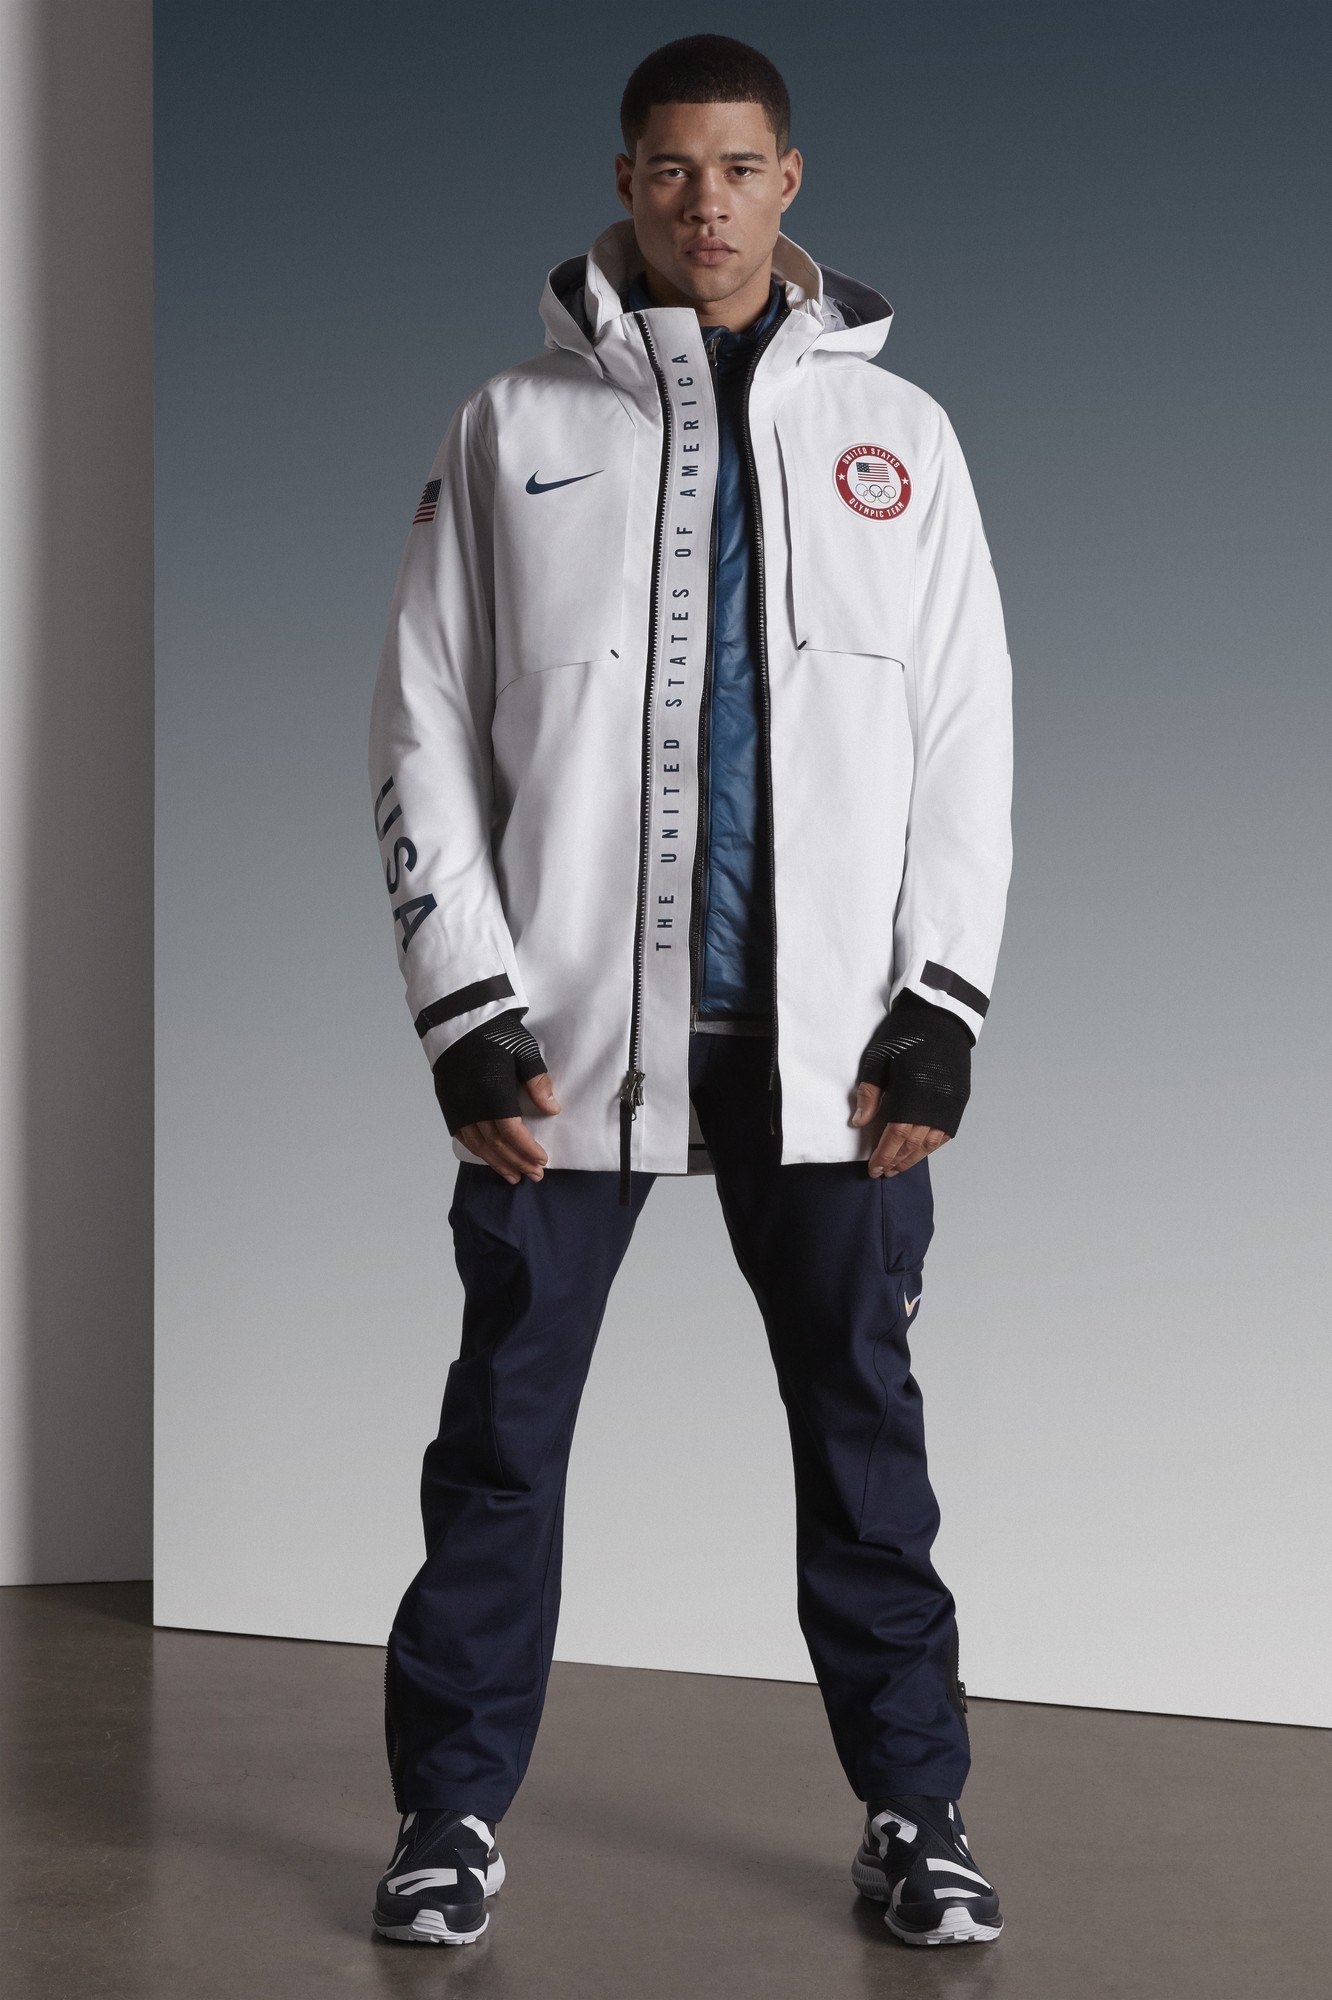 Men's Olympic medal stand outfit by Nike